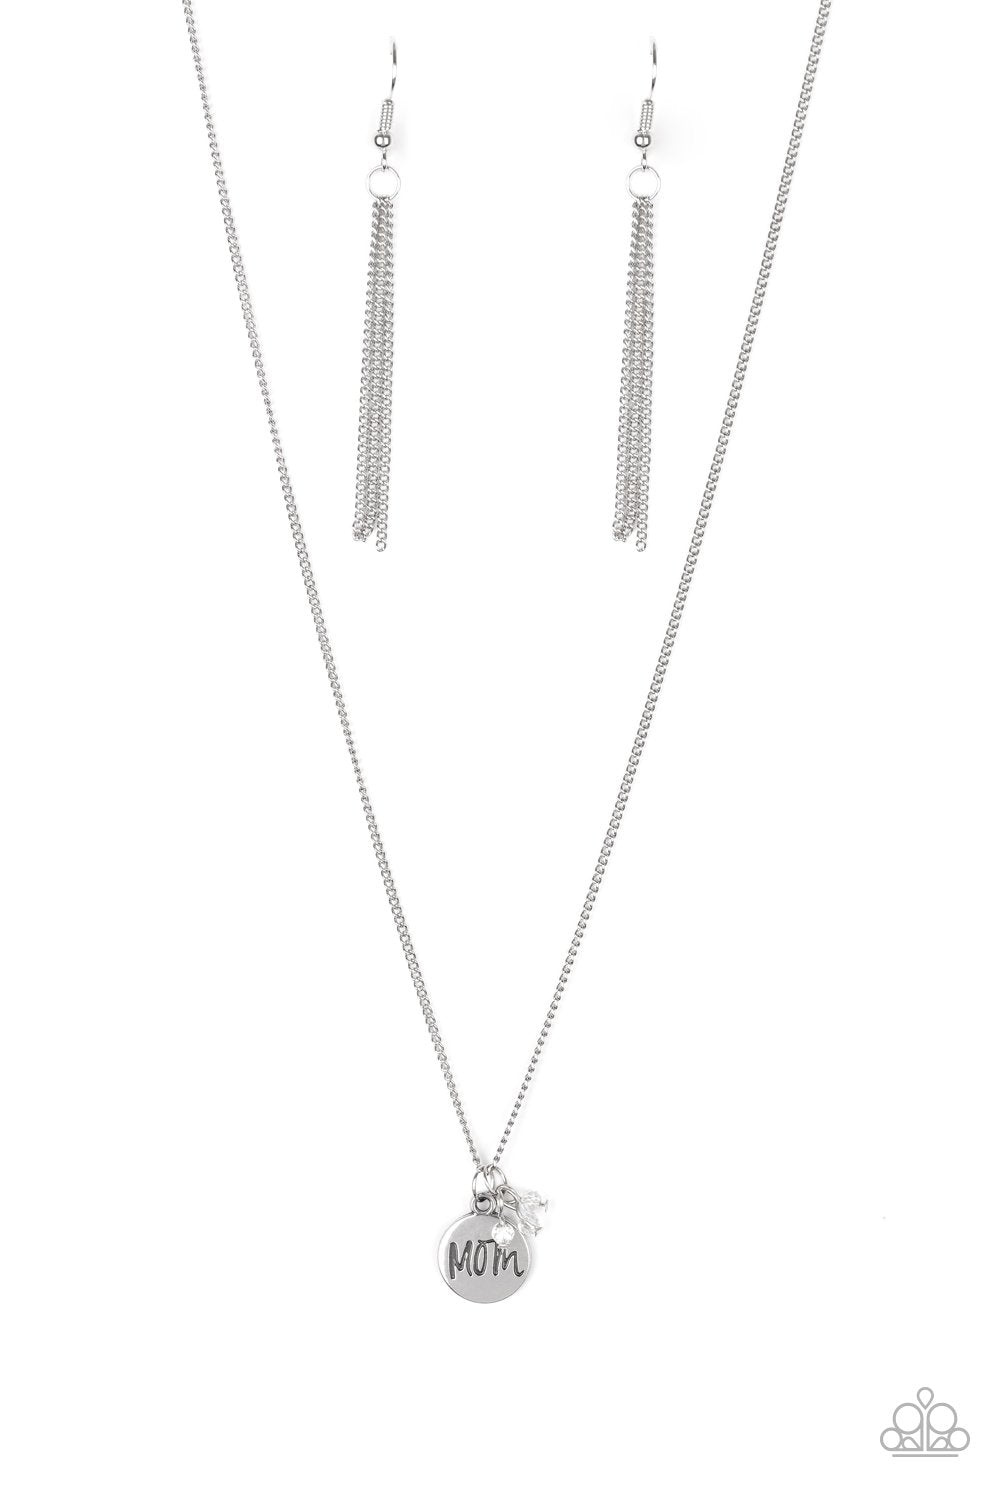 Mom Mode White and Silver Necklace - Paparazzi Accessories-CarasShop.com - $5 Jewelry by Cara Jewels